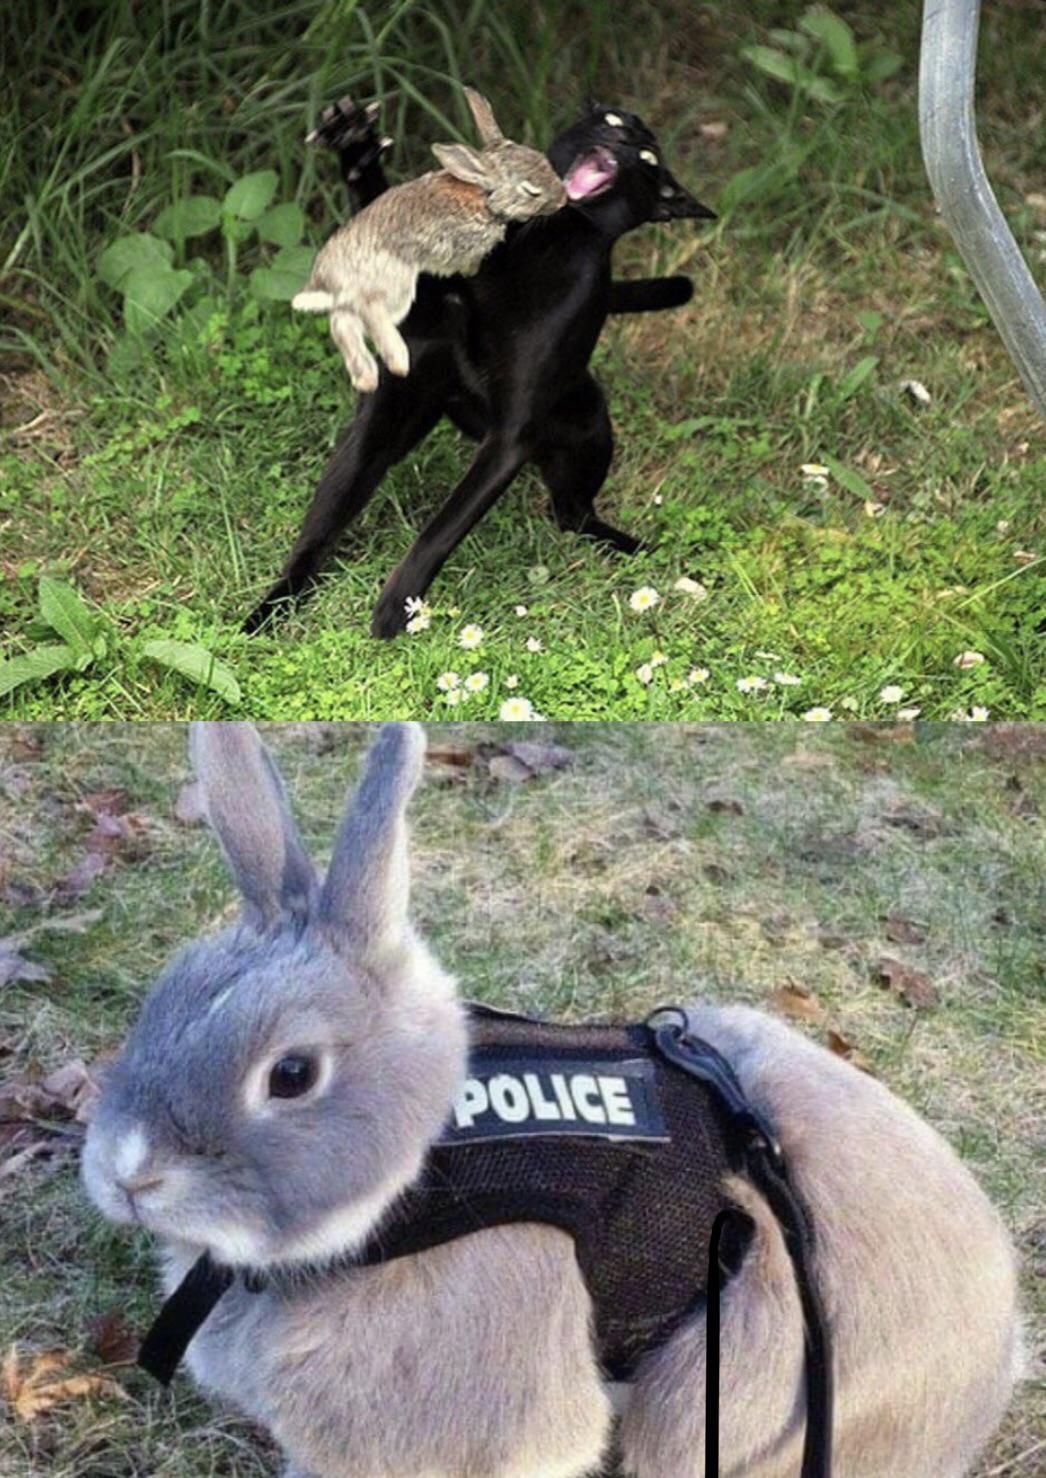 This rabbit you see here risked his life to catch this cat and now he's a cop